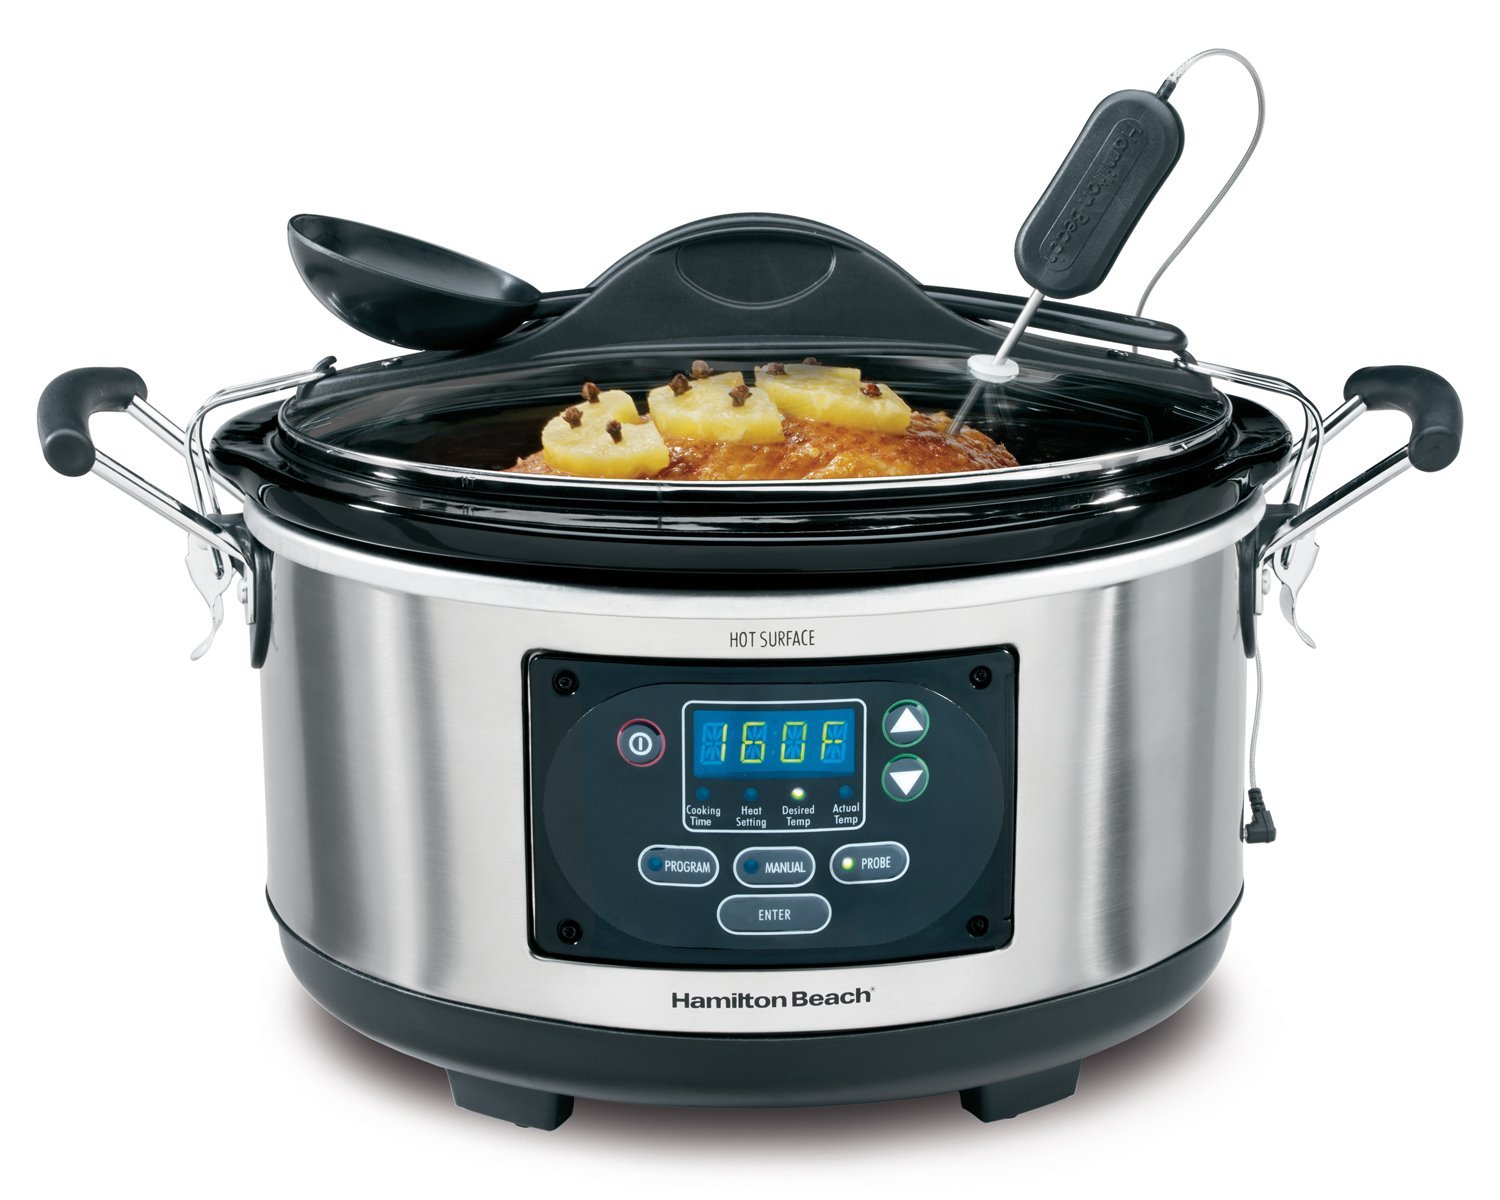 CARLY The Best Chili with the Crock-Pot® Express Crock Multi Cooker